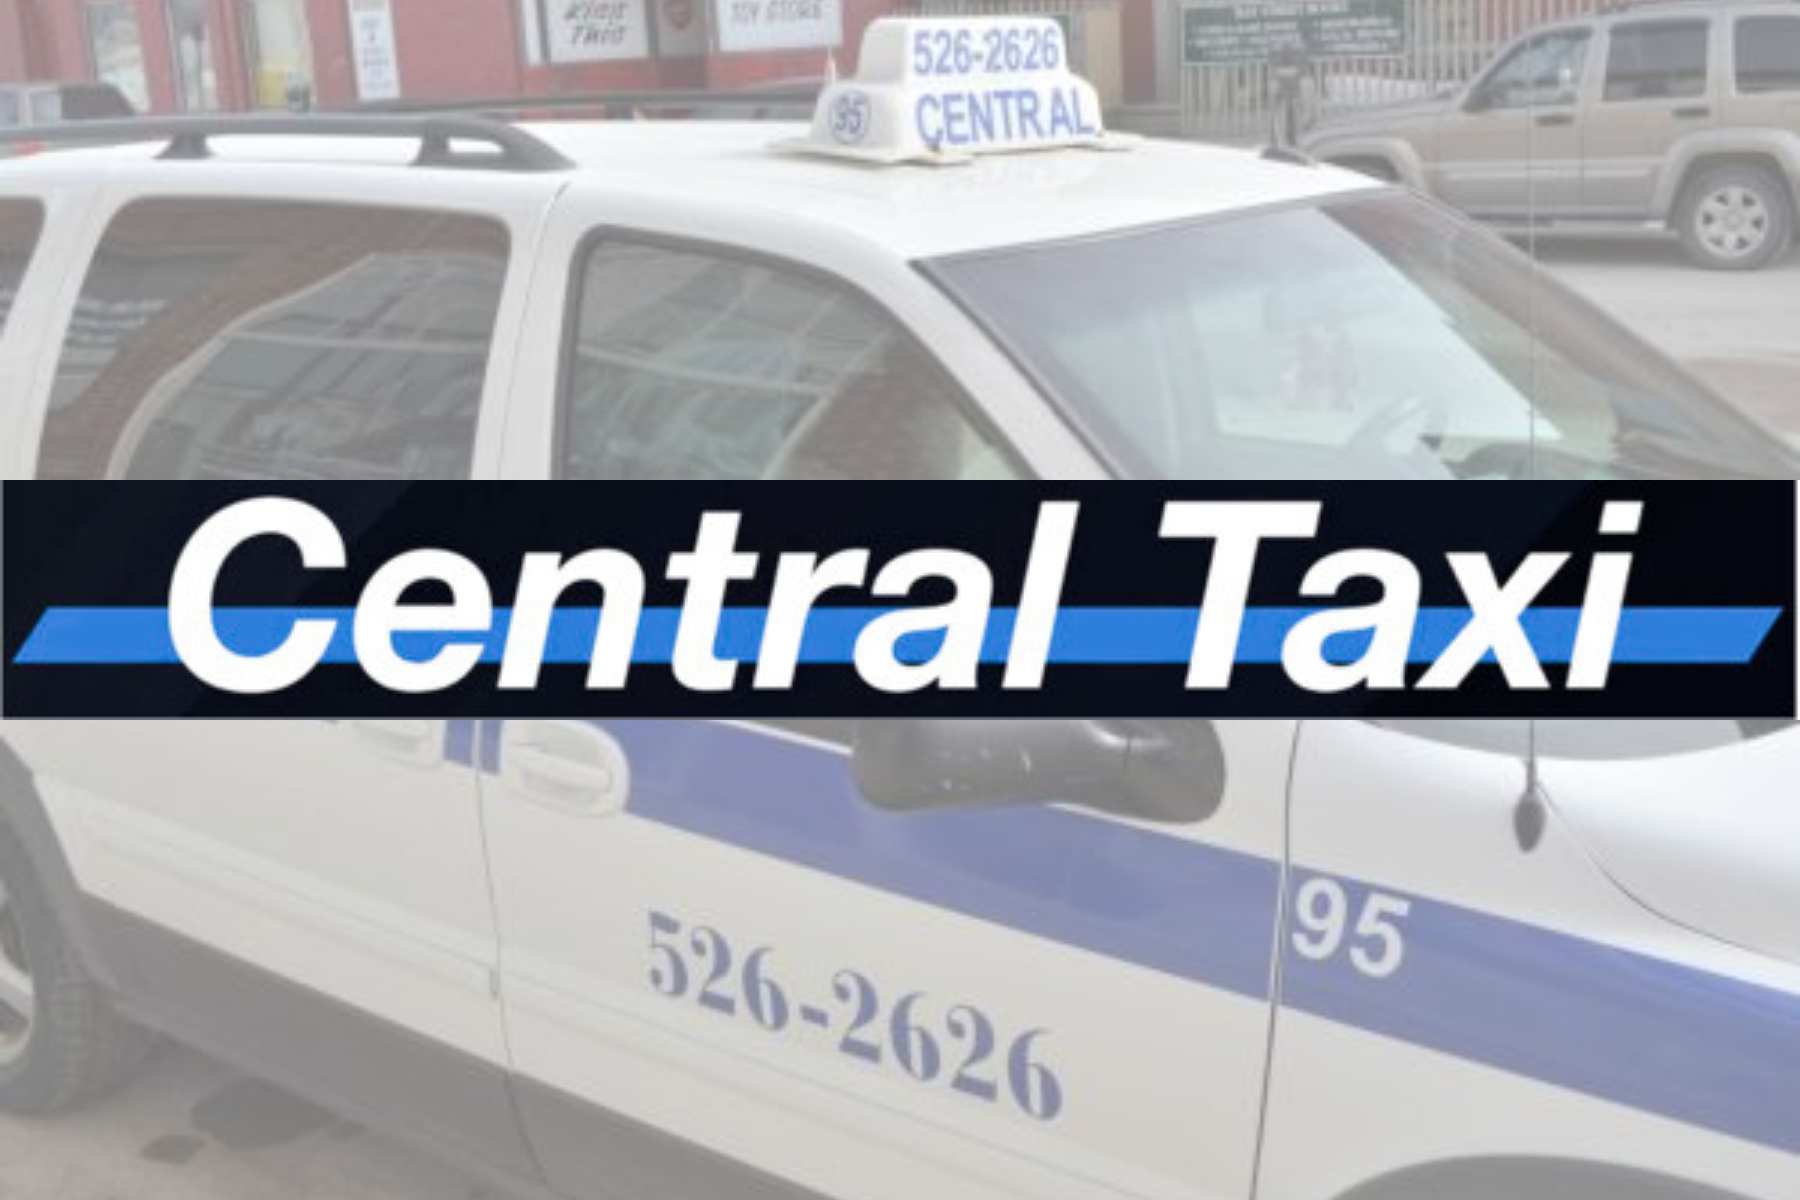 A blue and white Central Taxi